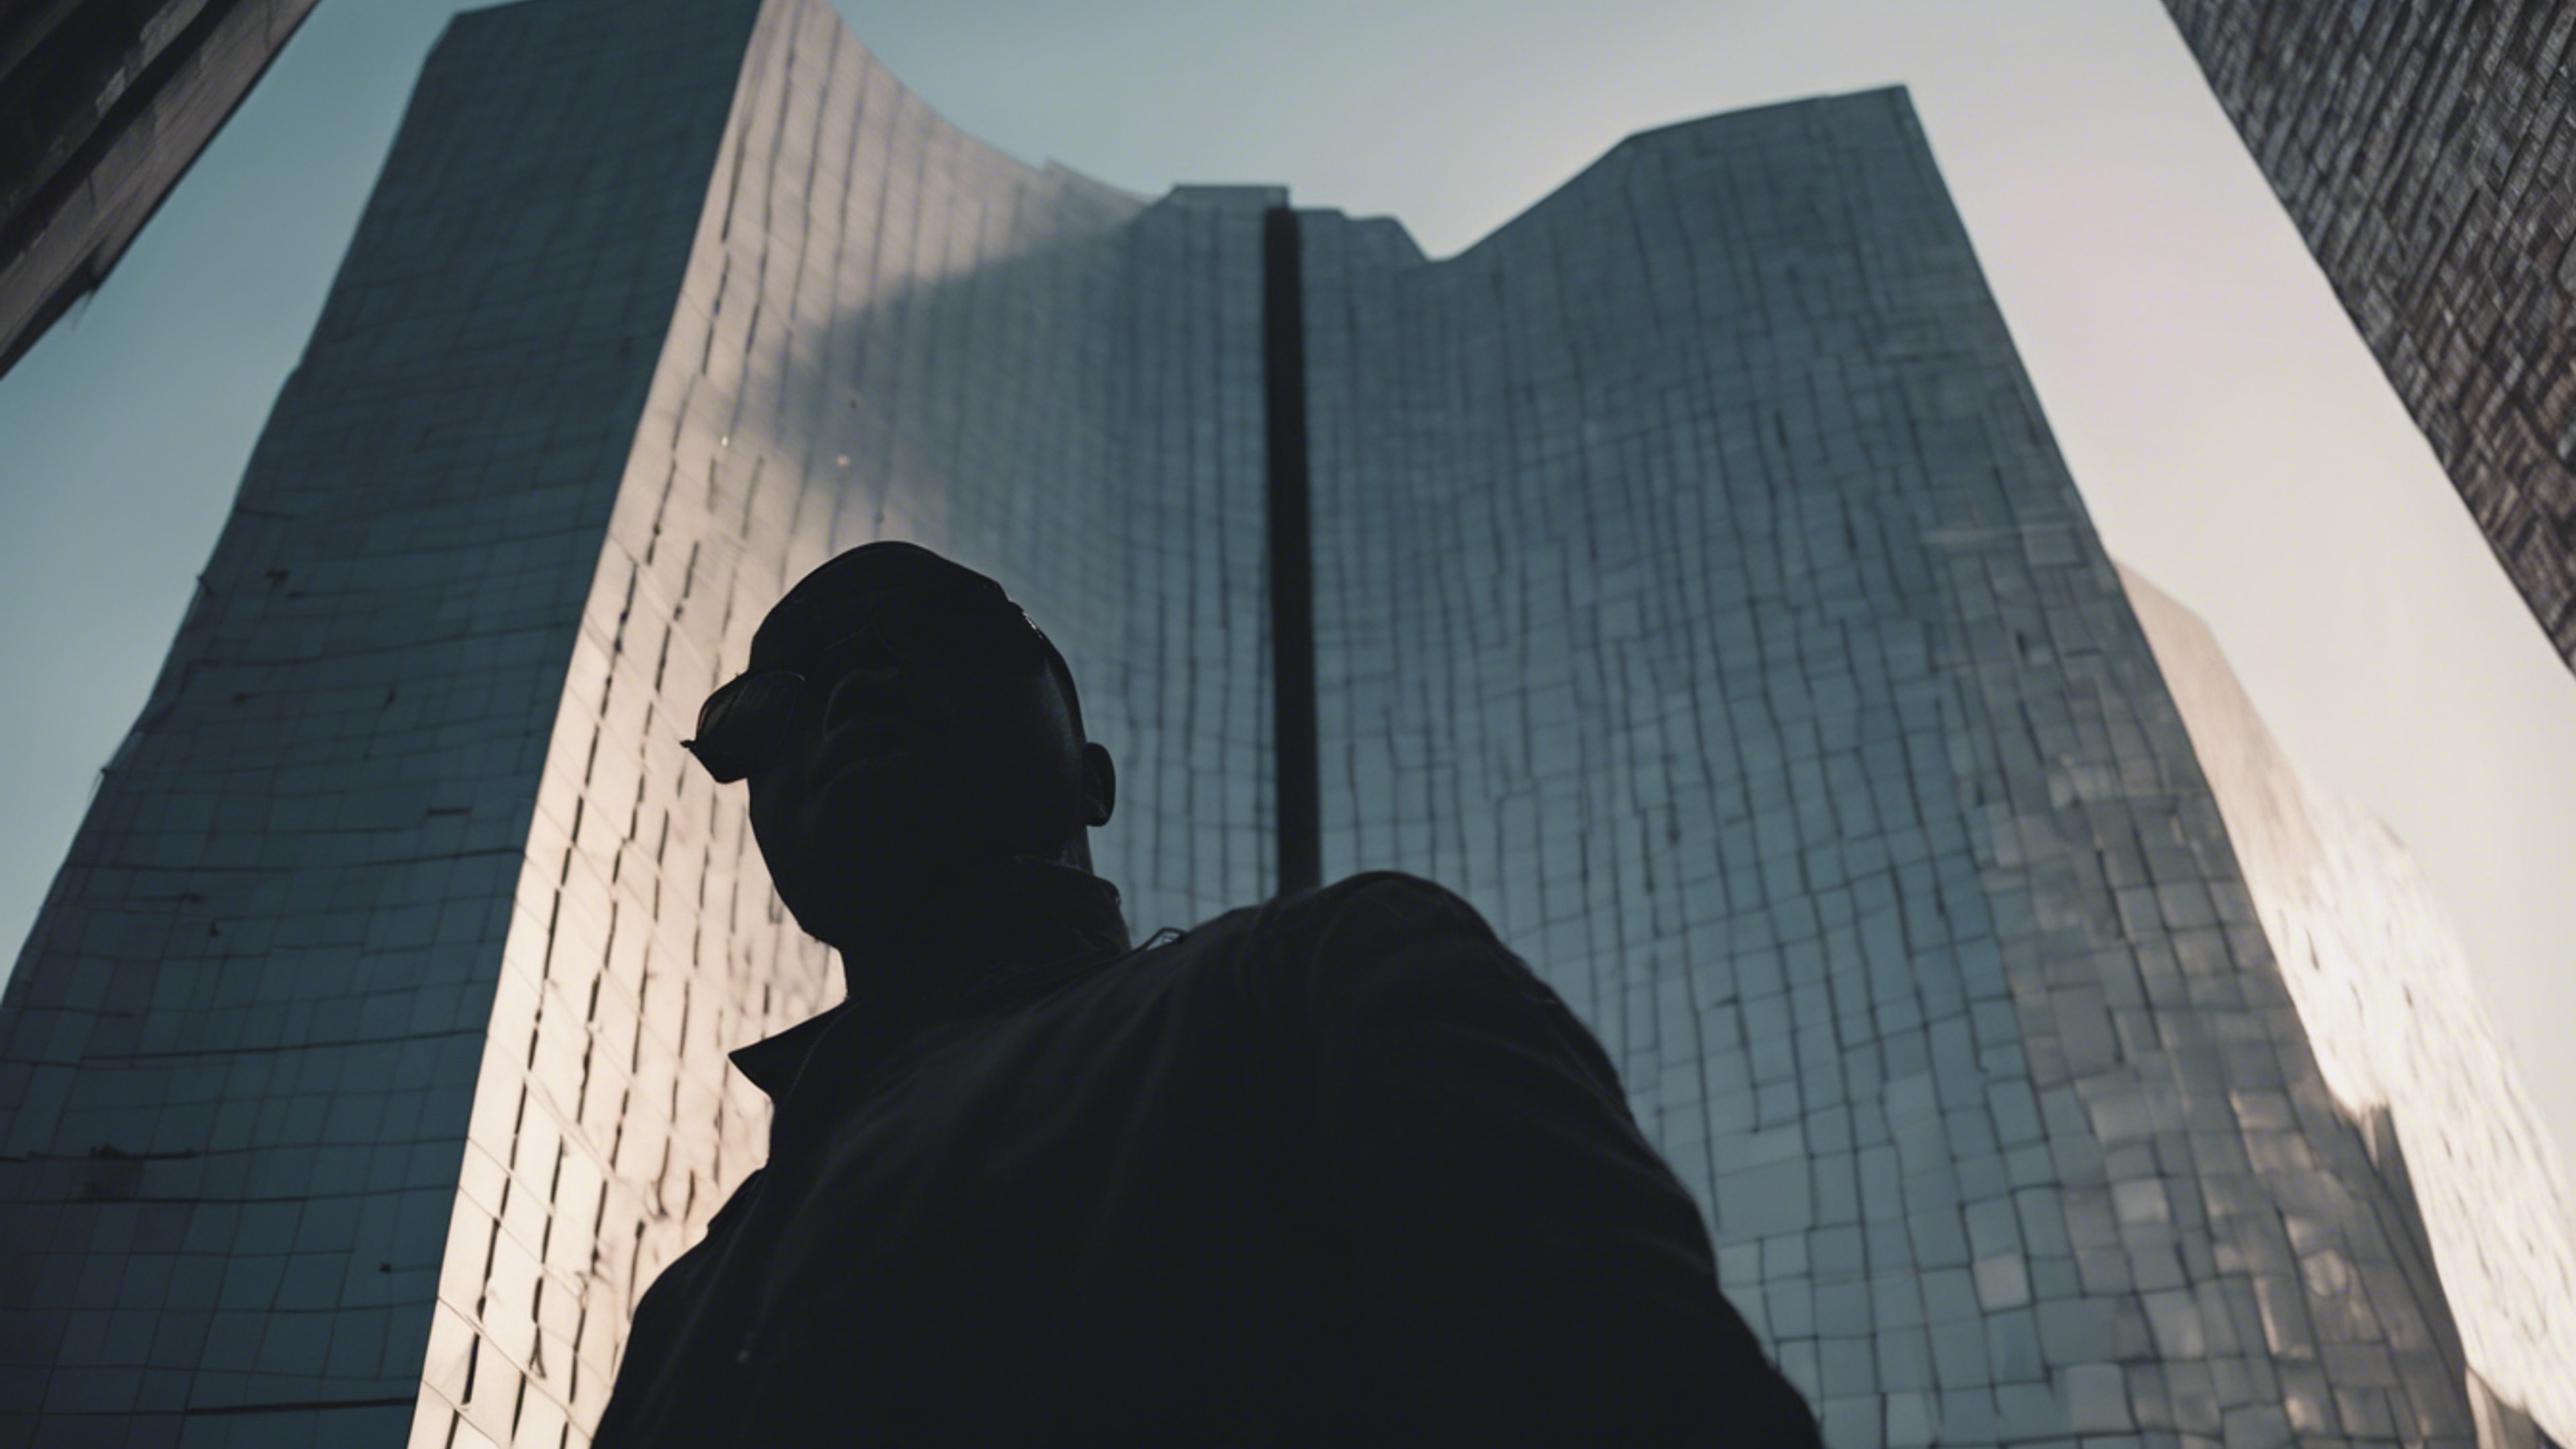 The shadowy silhouette of a man against a gigantic, modern textured building Wallpaper[fc5ae4f98fd145a8959c]